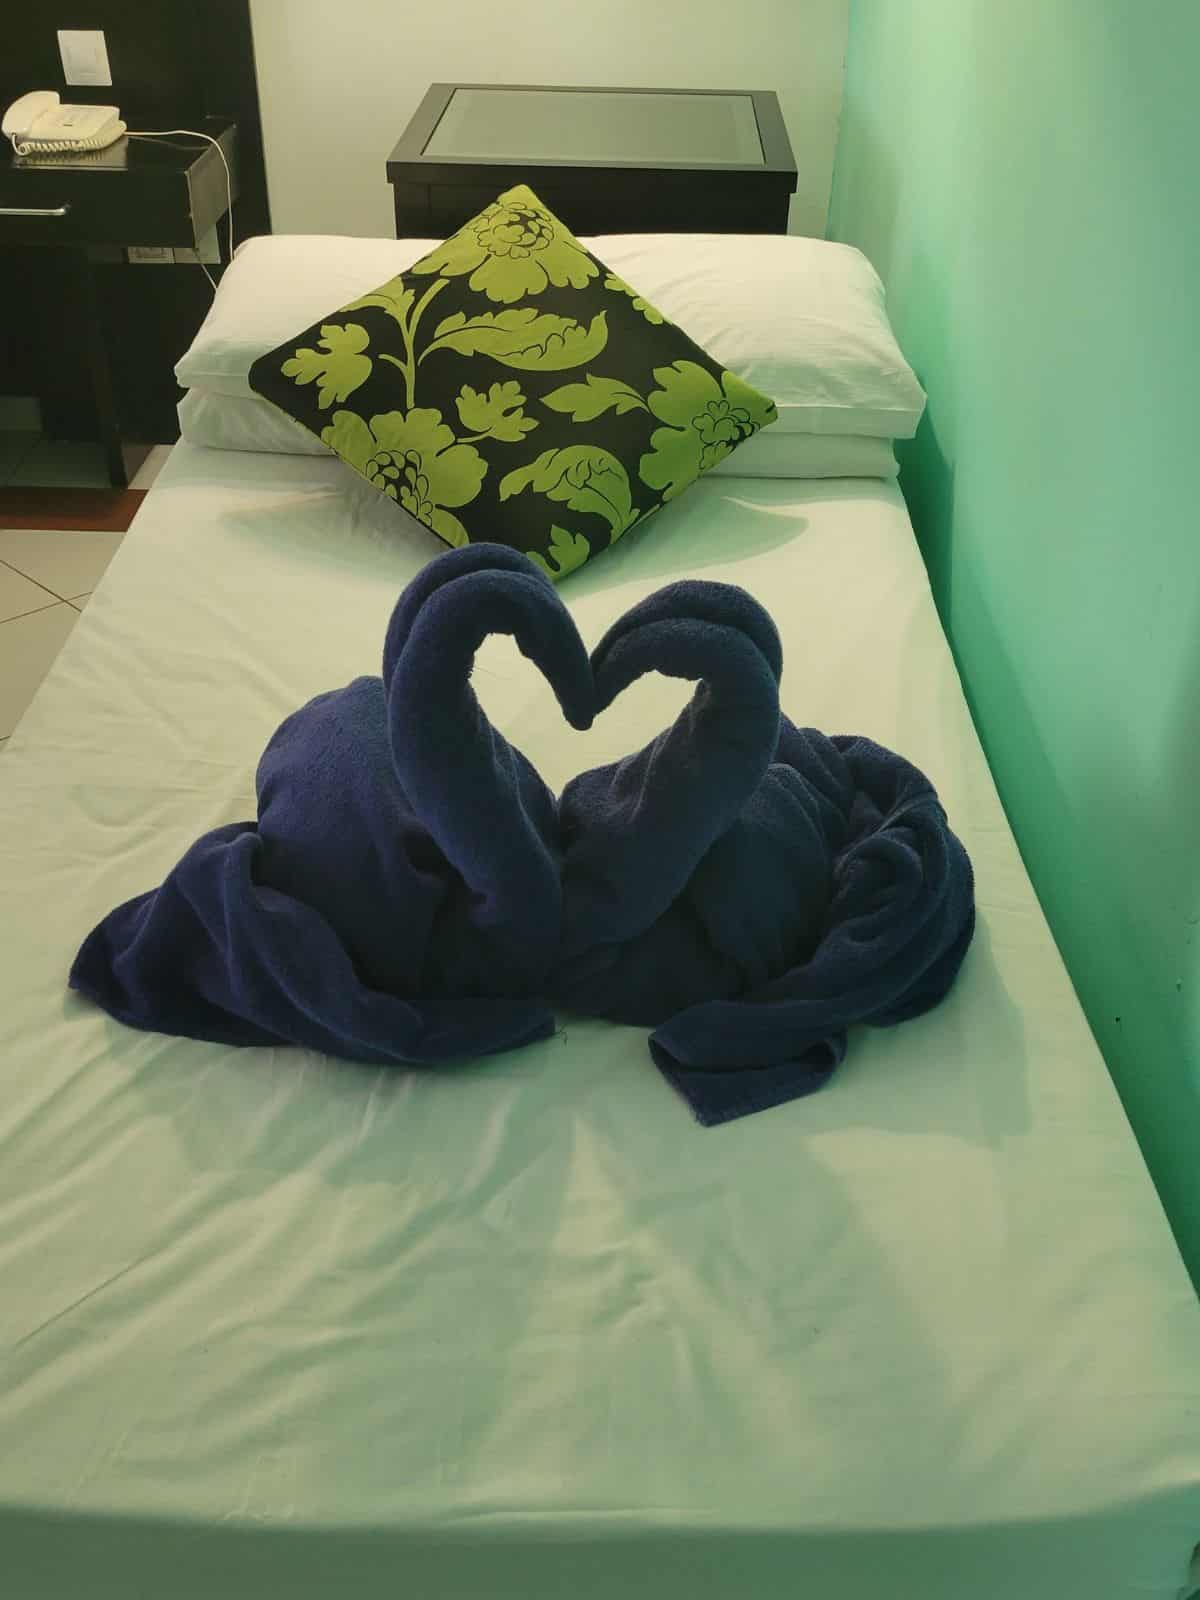 Two towels are shaped together to form two swans touching noses creating a heart shape in the center. 